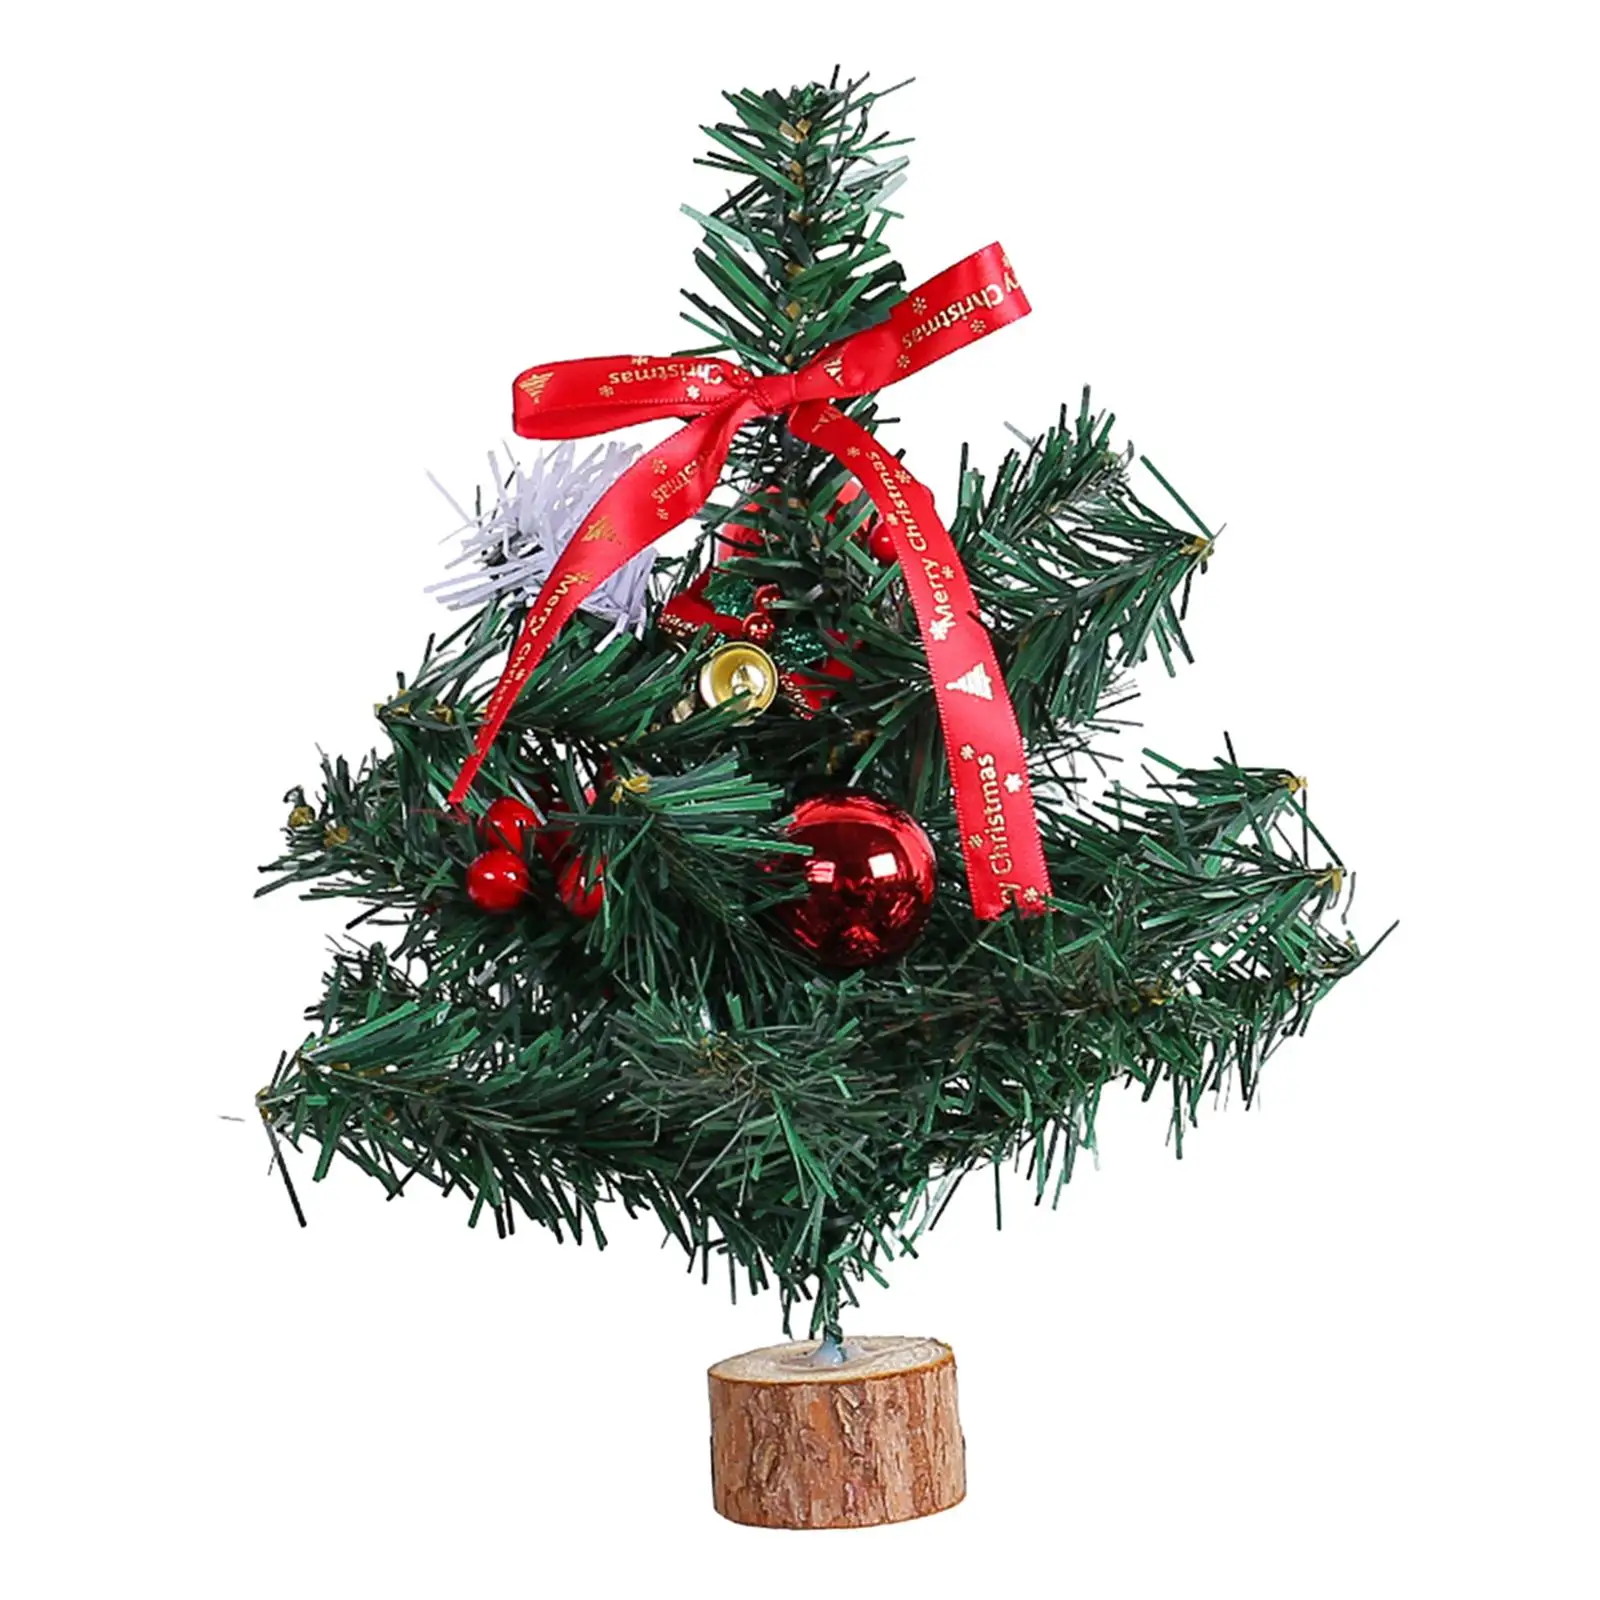 Tabletop Mini Christmas Trees Small with Wooden Base Christmas Ornament Crafts Artificial Xmas Tree for Office Bars Fireplace